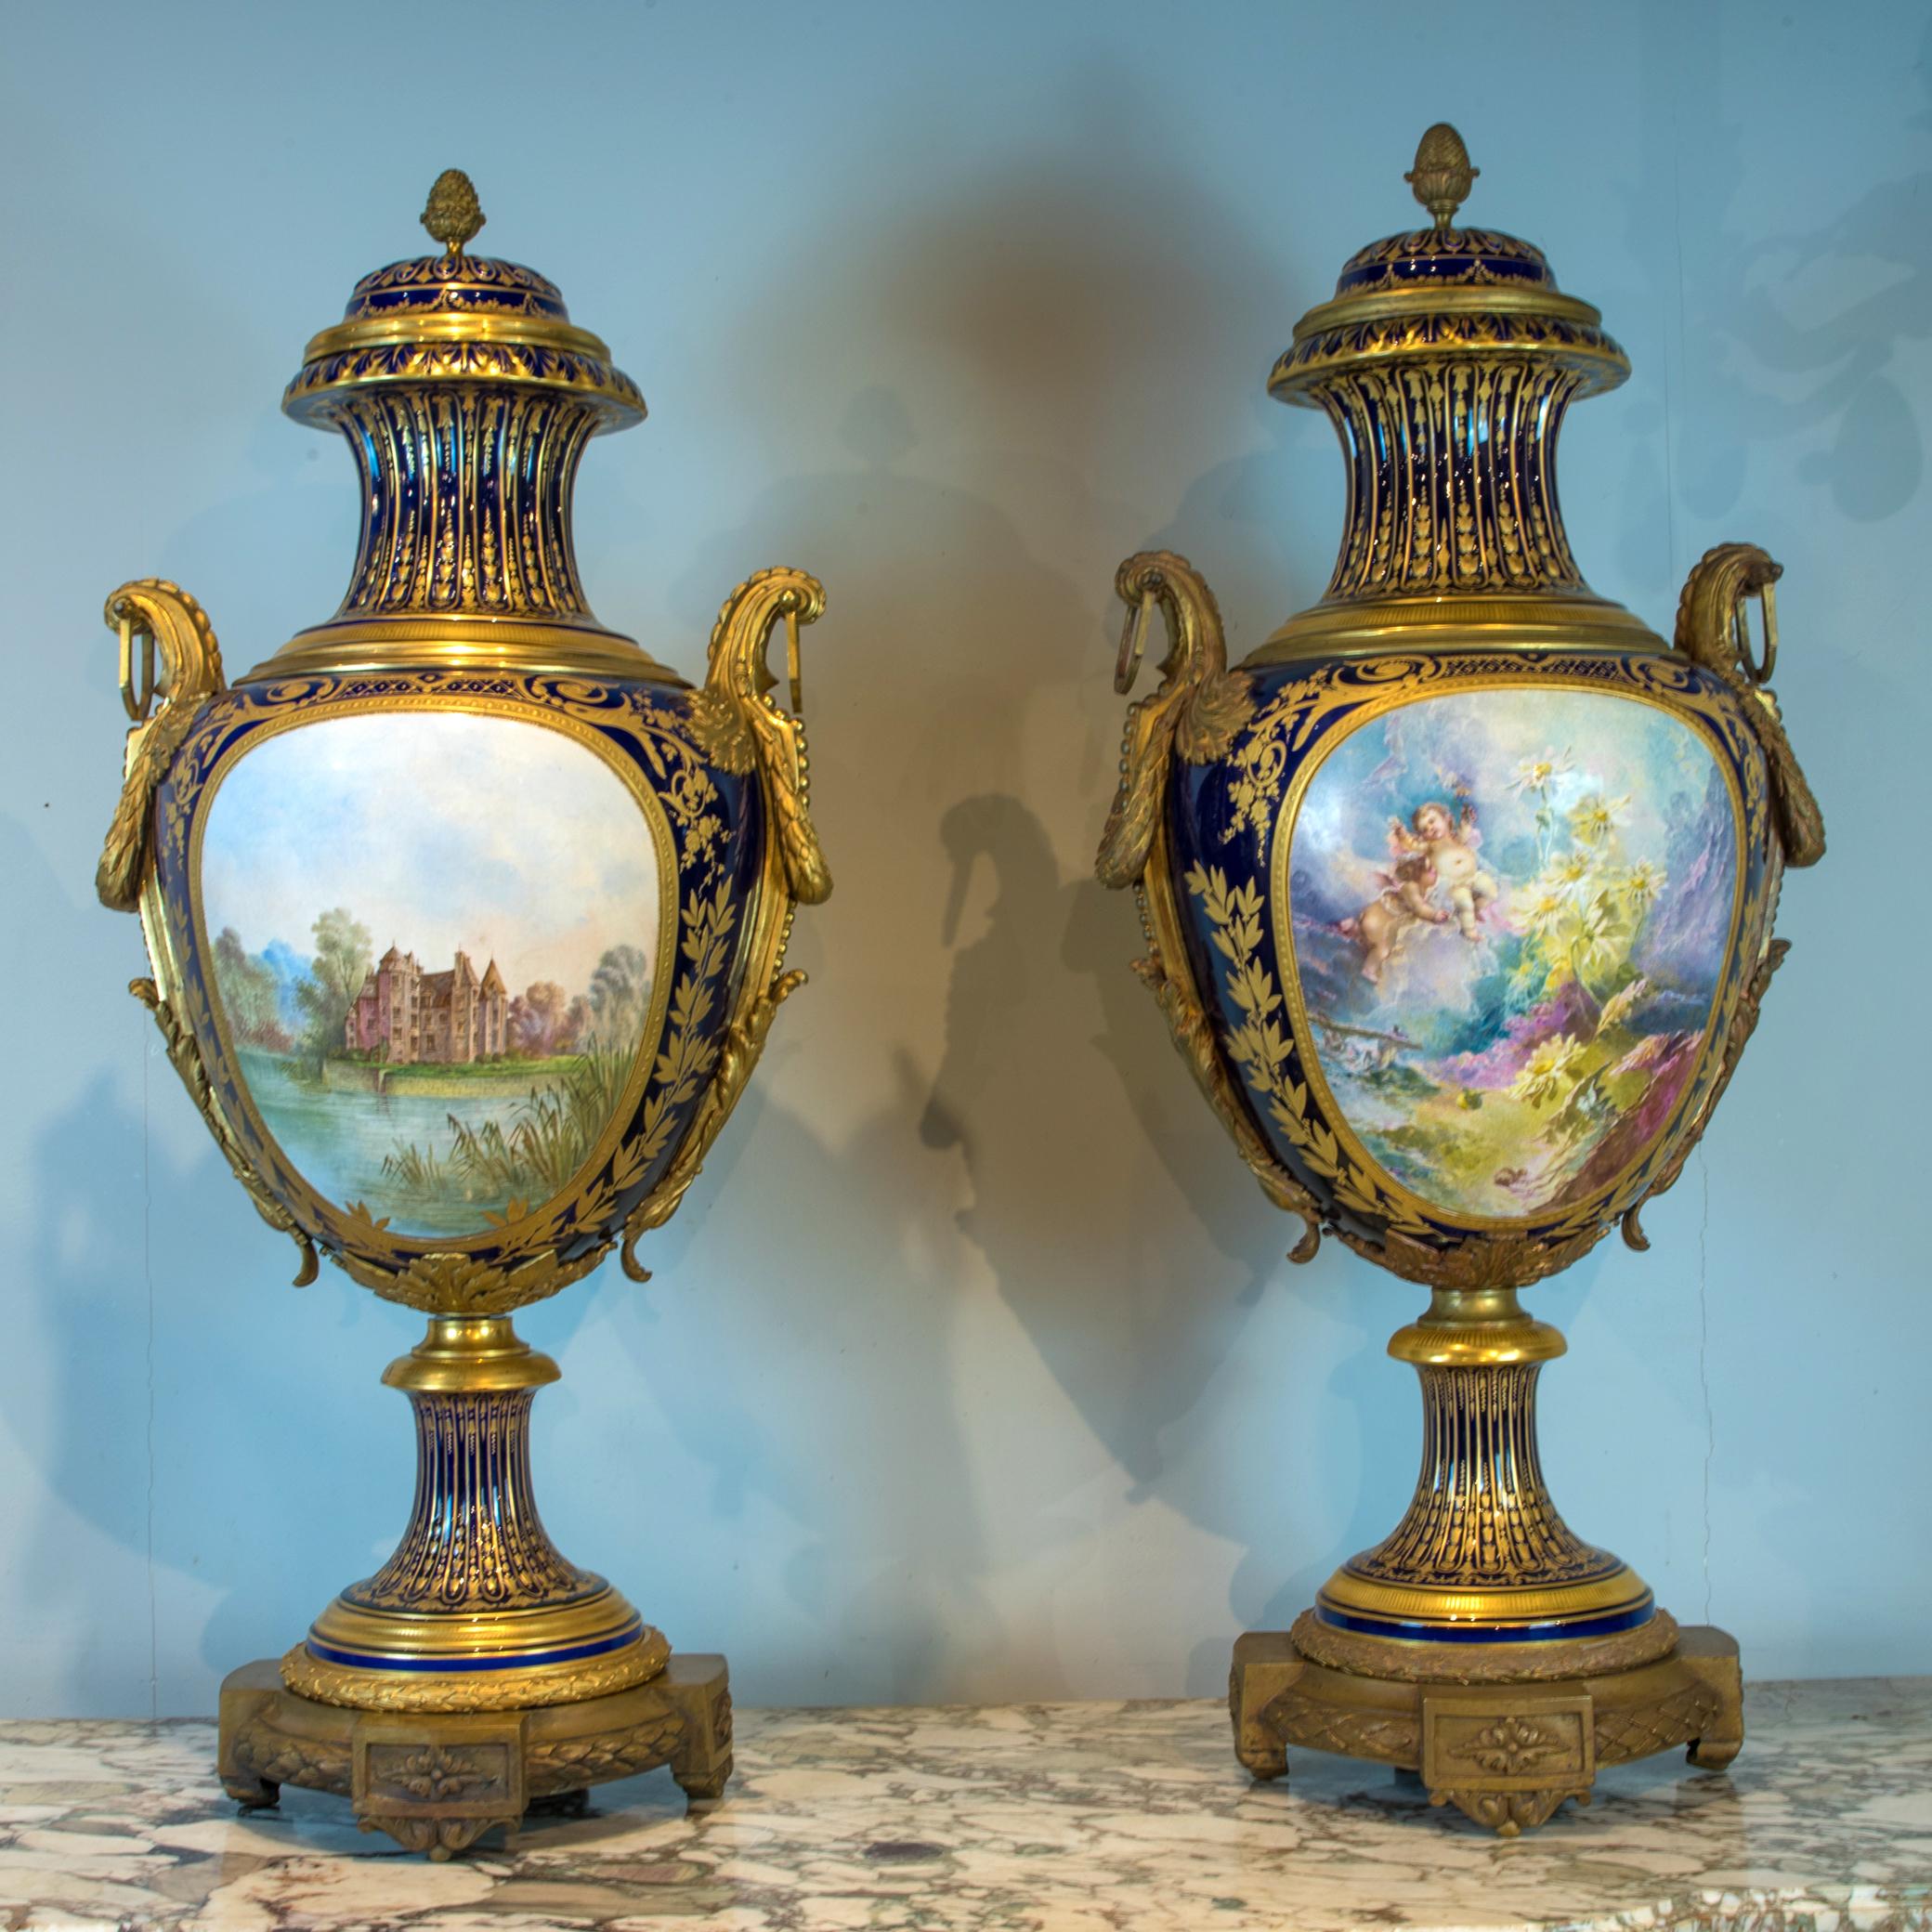 Rococo Monumental Pair of Magnificent Ormolu Mounted Sèvres Porcelain Vases For Sale